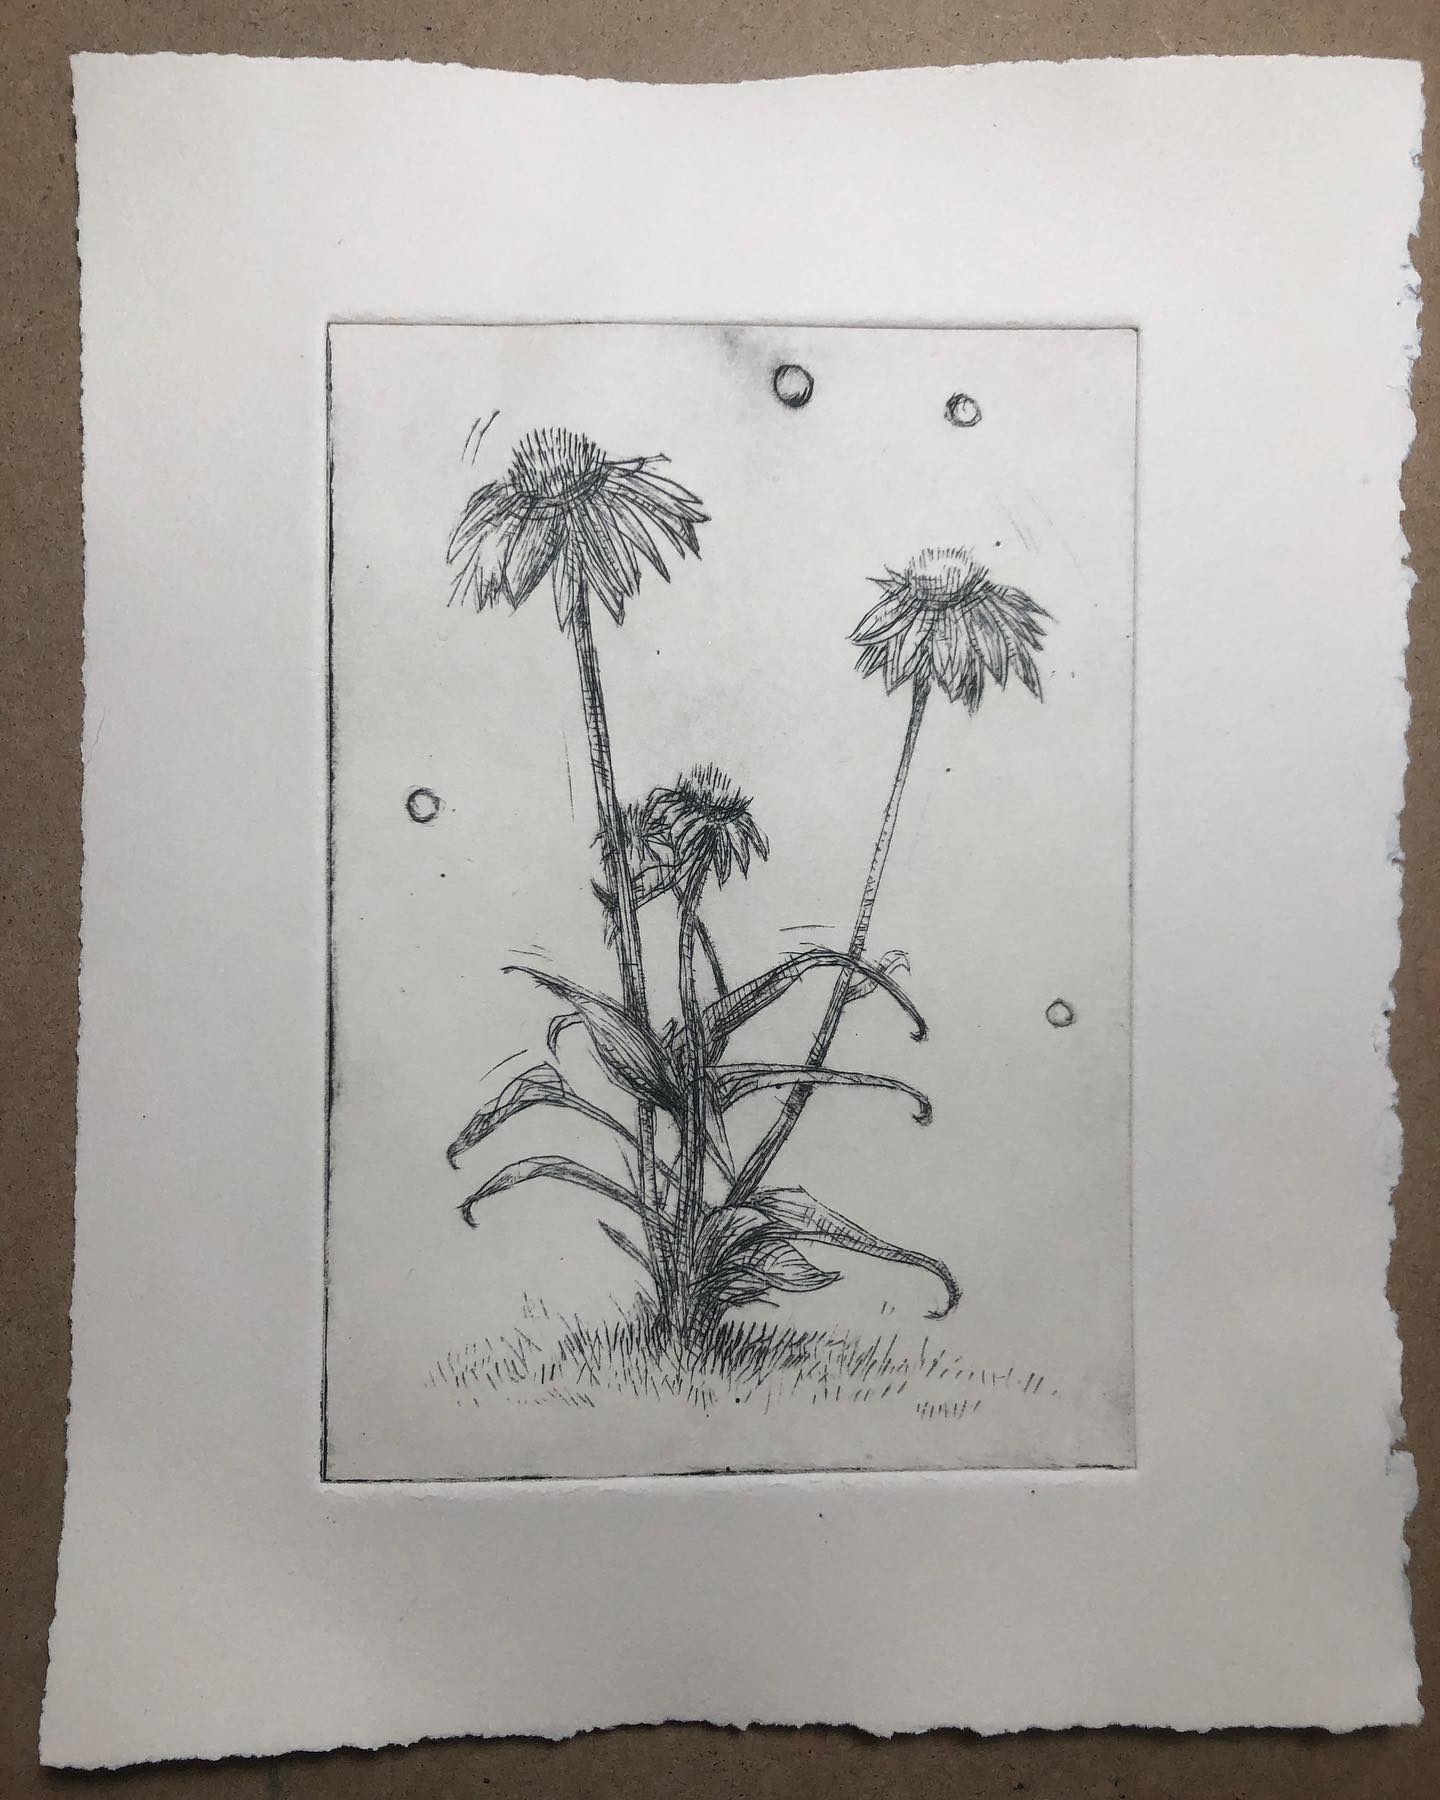 Drypoint print of a group of Echinacea flowers